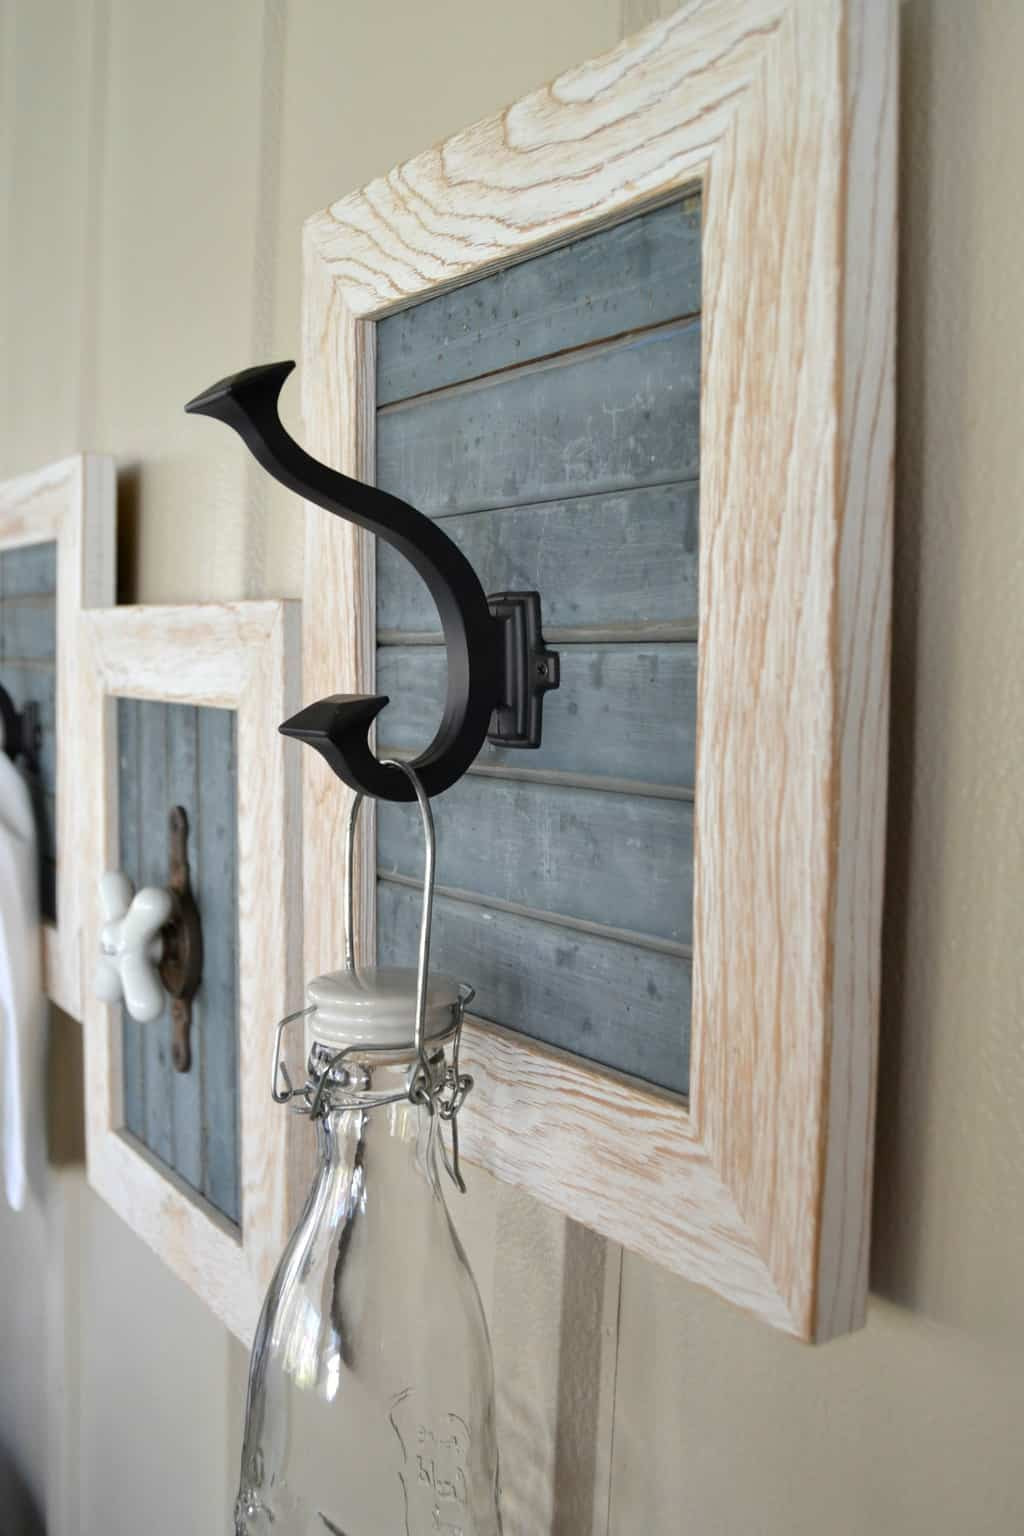 Decorative Bathroom Hooks
 DIY Decorative Hooks That Can Be Used In Many Rooms In